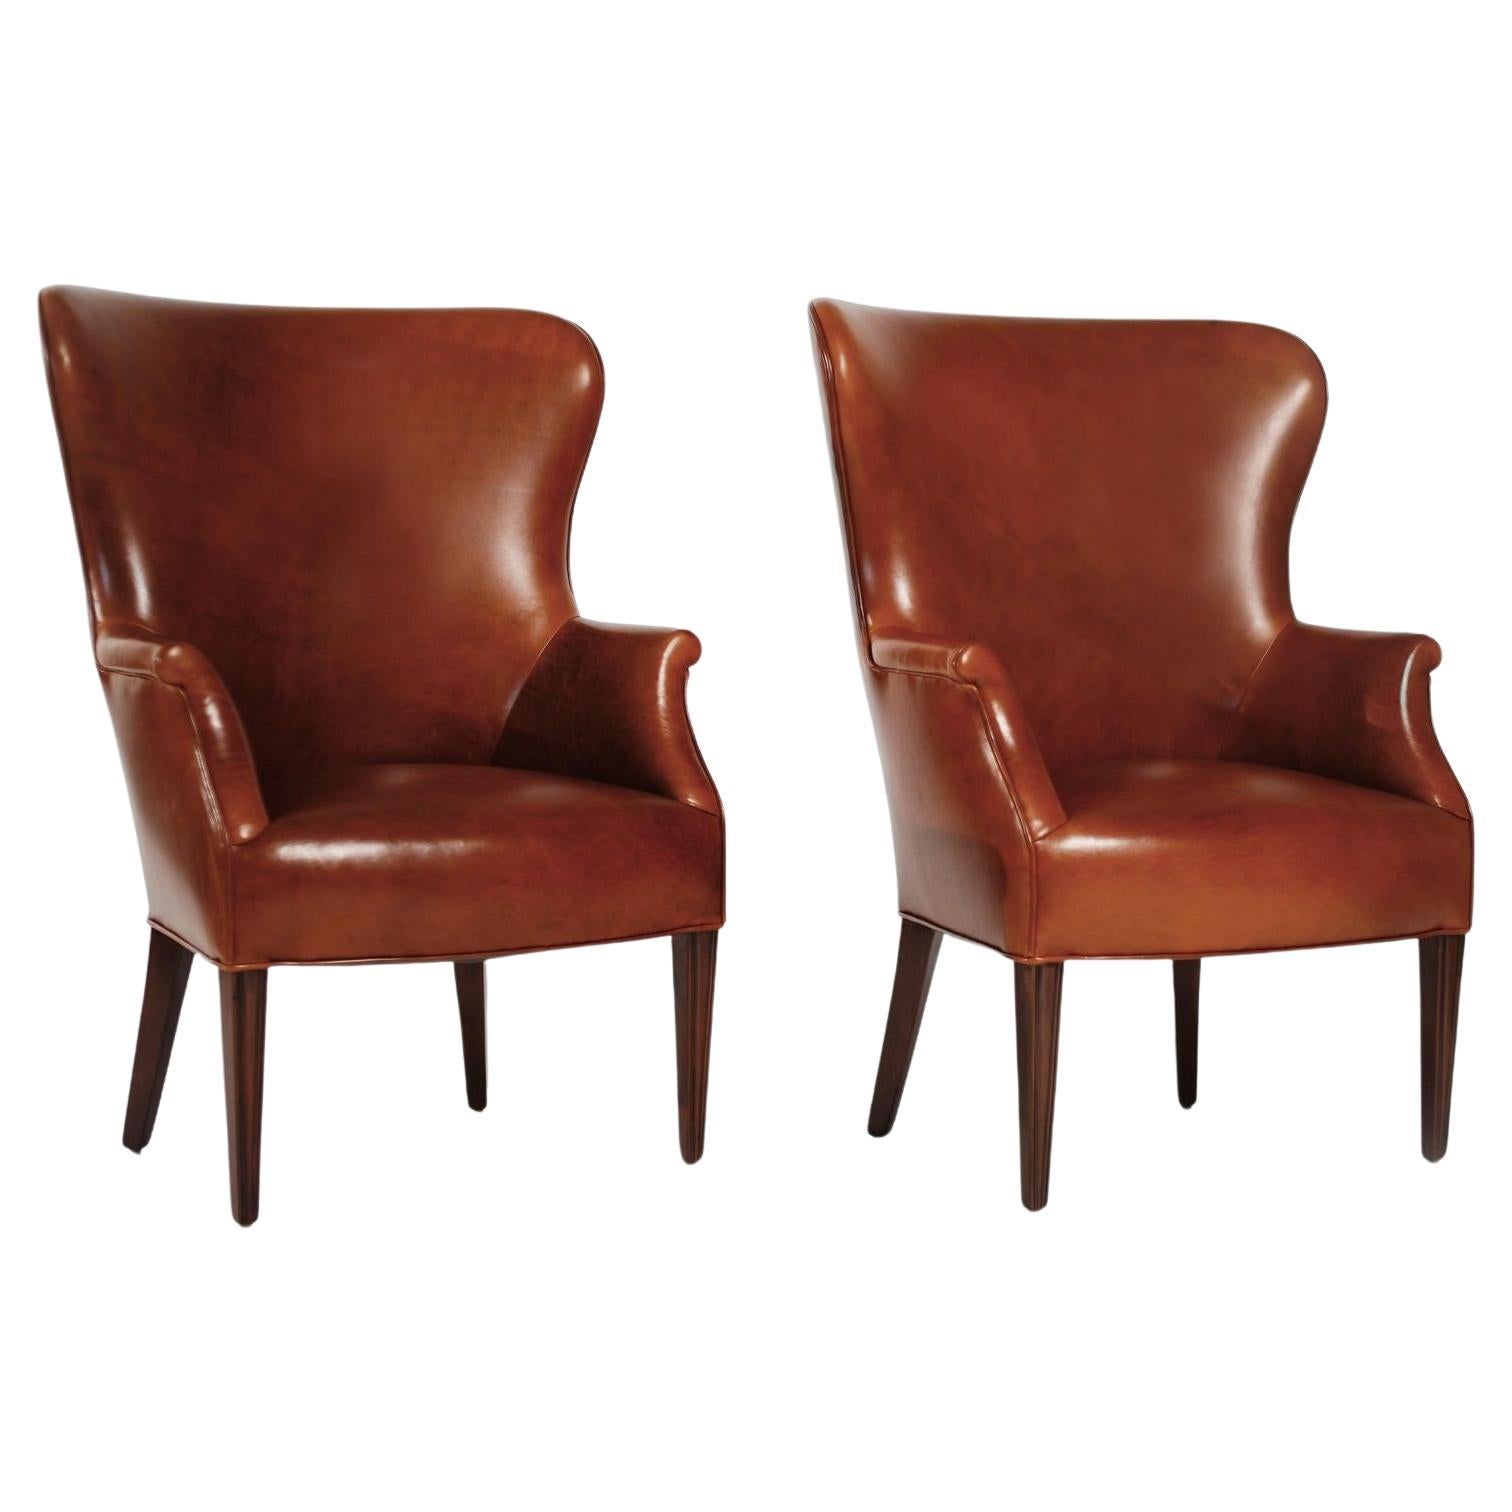 Set of Winback Club Chairs in Cognac Leather, C. 1950s